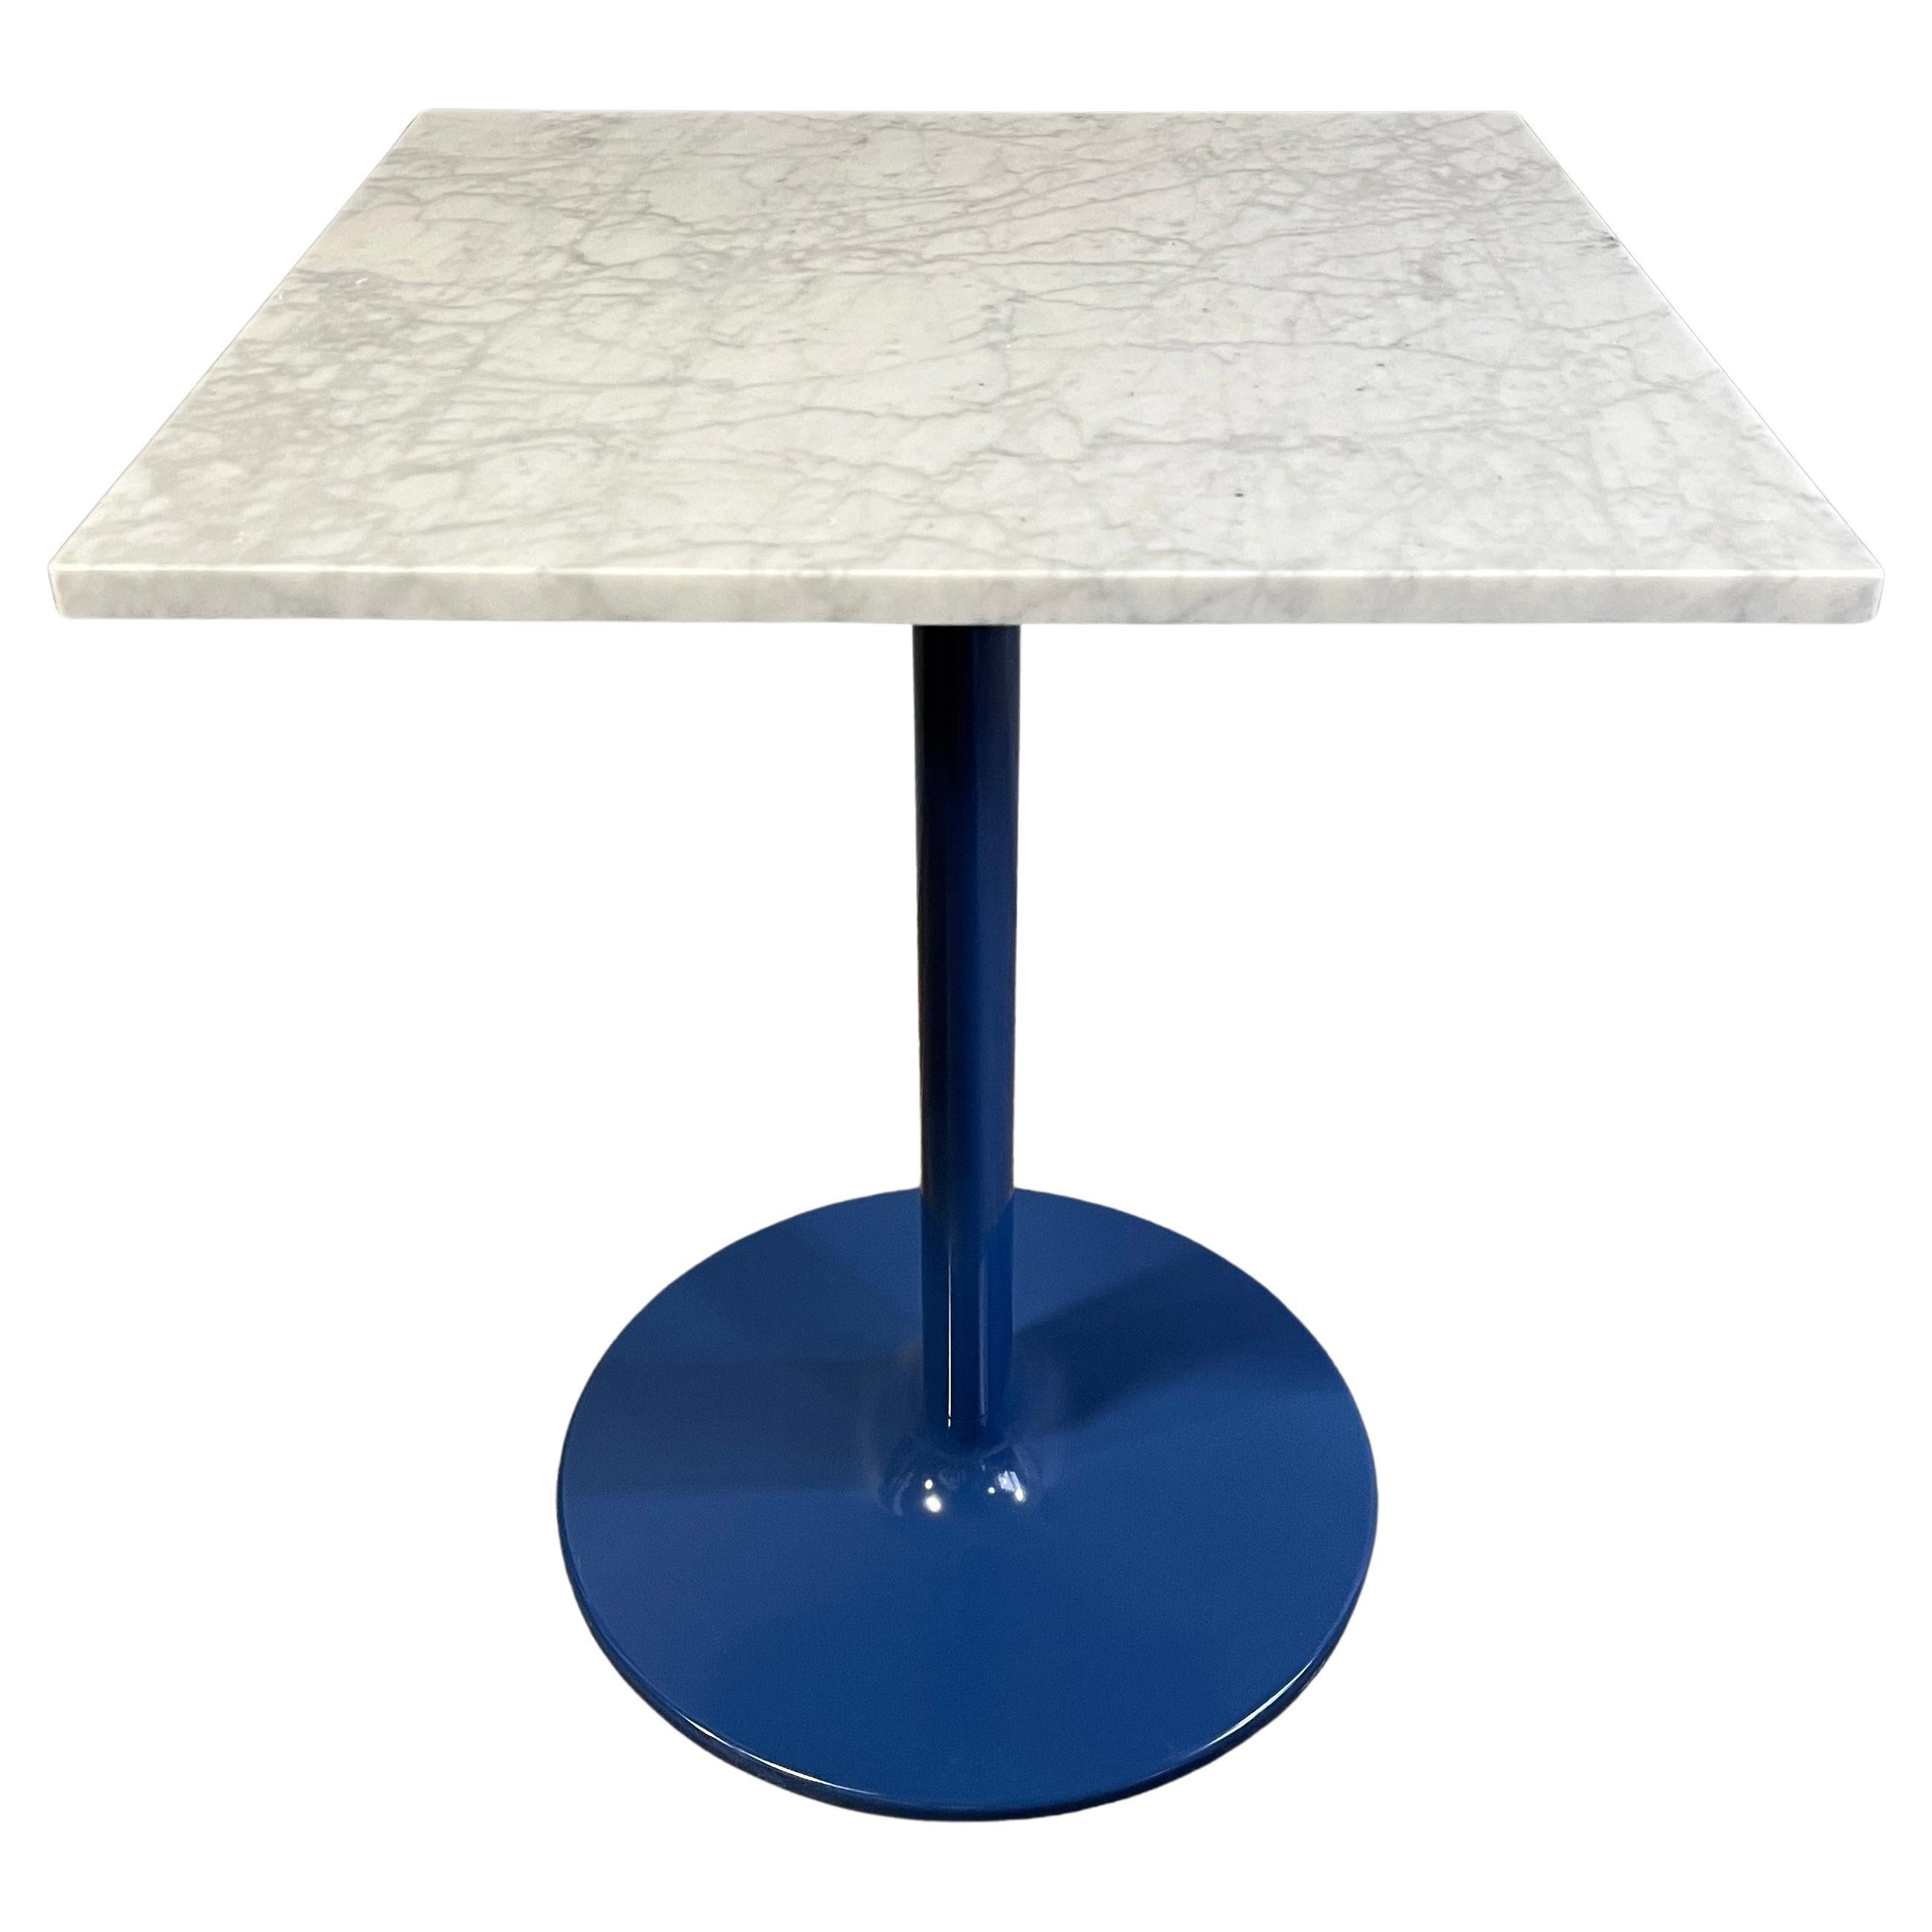 Sleek marble table with lacquered blue aluminum circular base and oval column. Incredibly sturdy and well made. Perfect cafe table for the kitchen or small apartment dining. Post modern design echoes Saarinen and Sottsass. Beautiful and in near mint